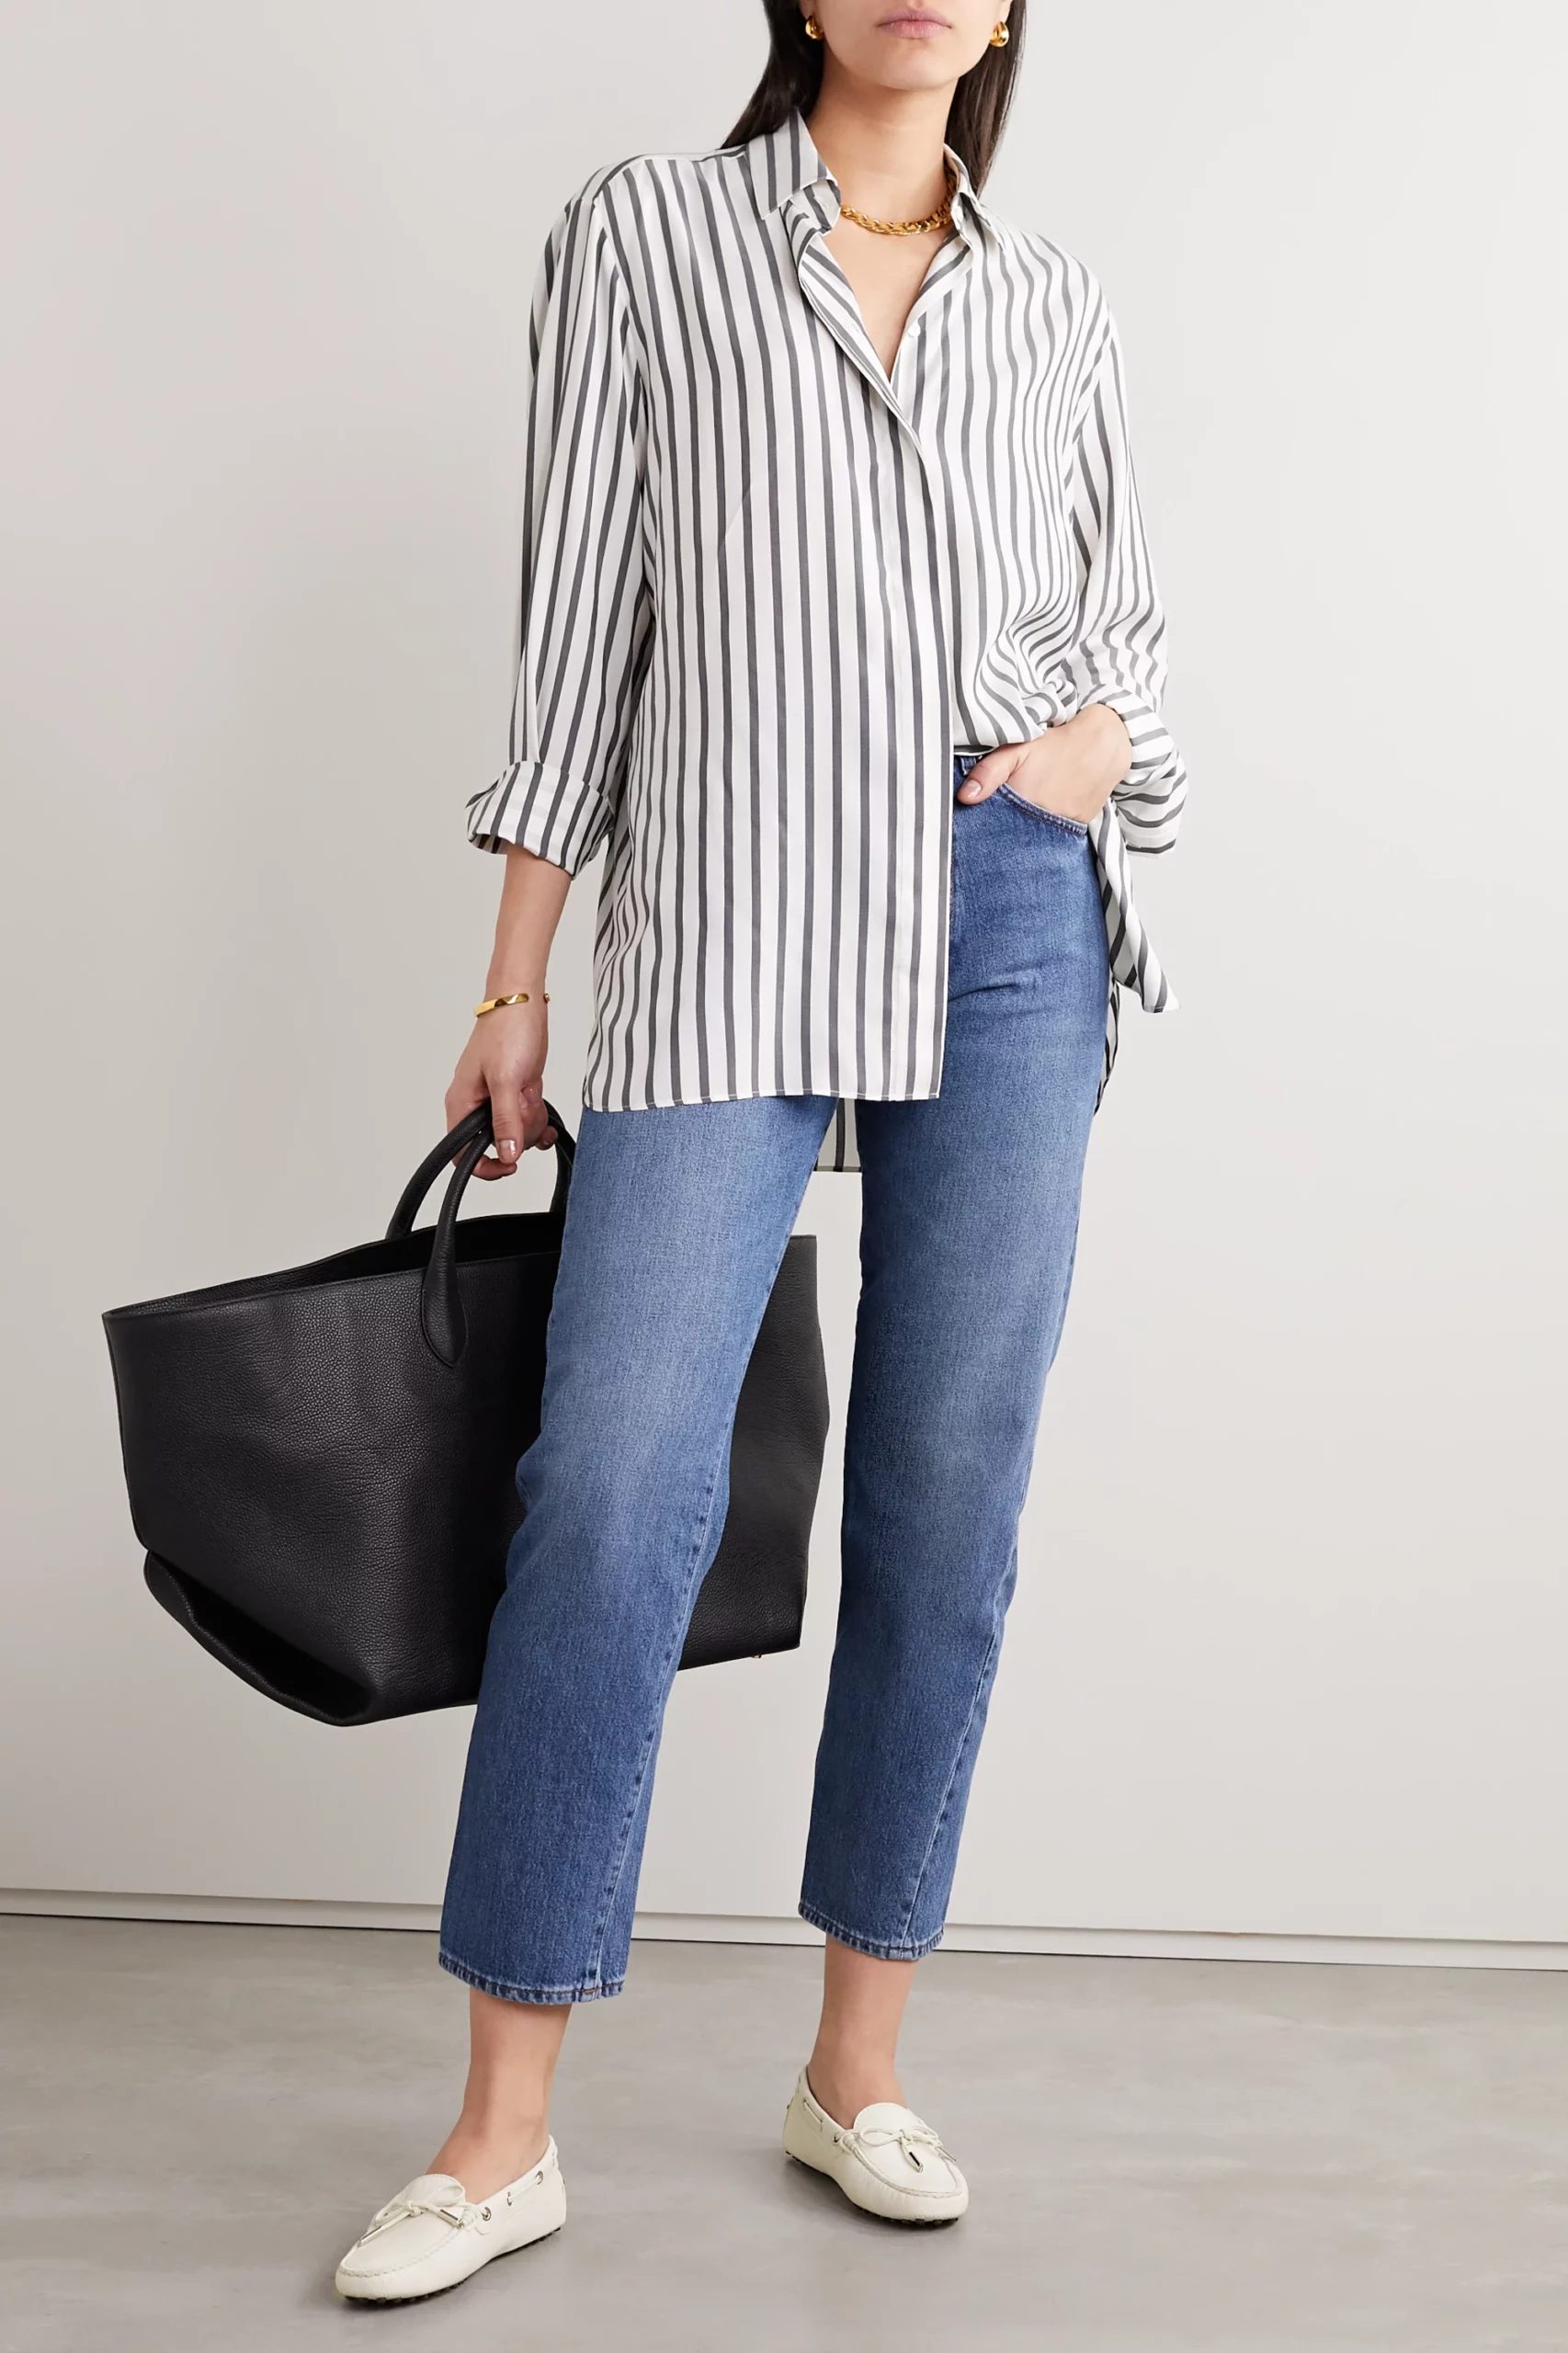 13.-high-rise-jeans-scaled.webp